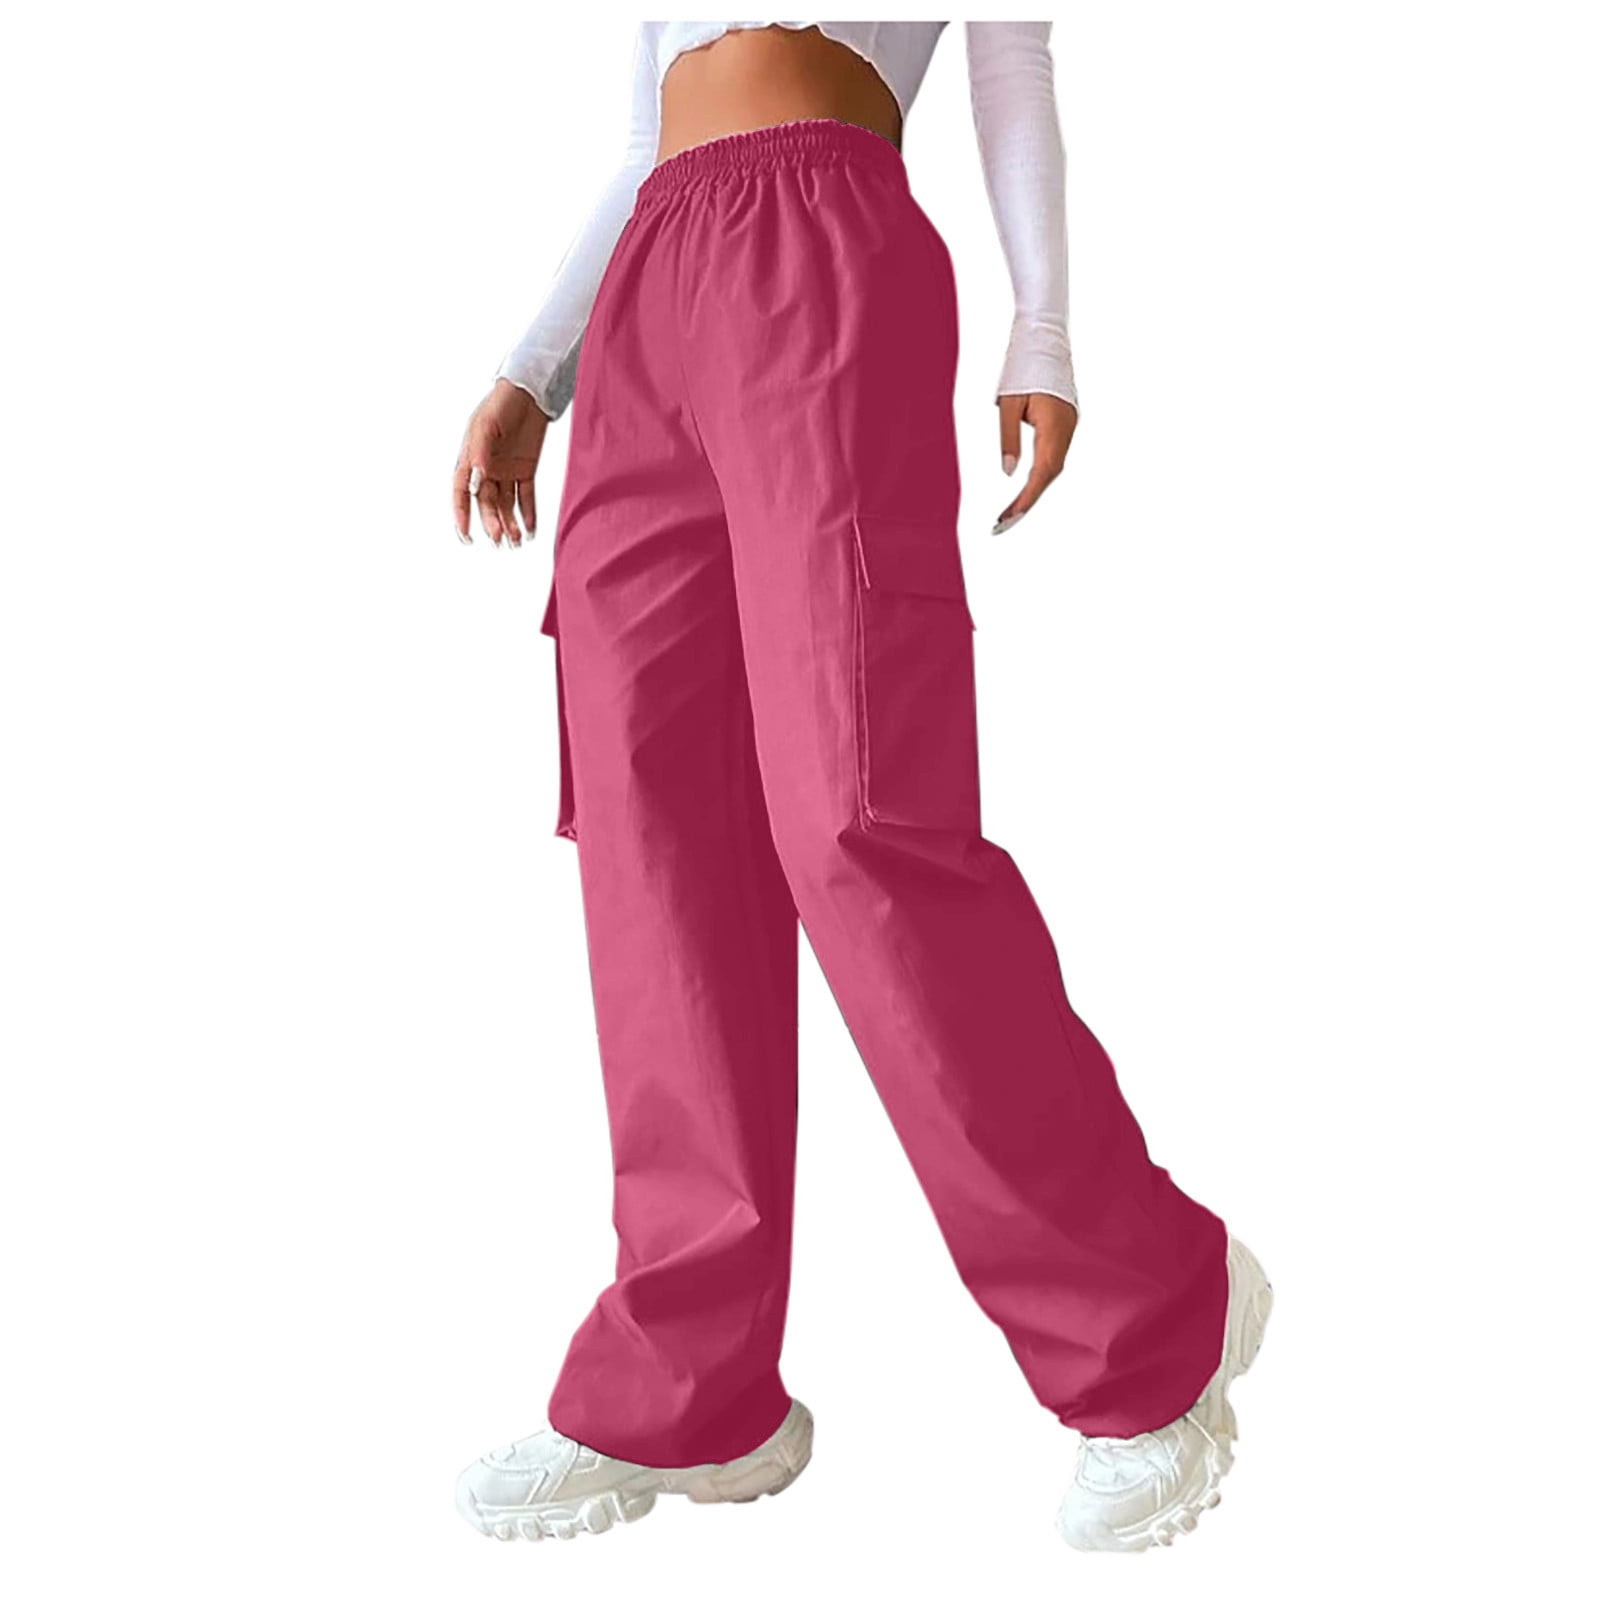 COLLUSION low rise wide leg parachute pant in hot pink